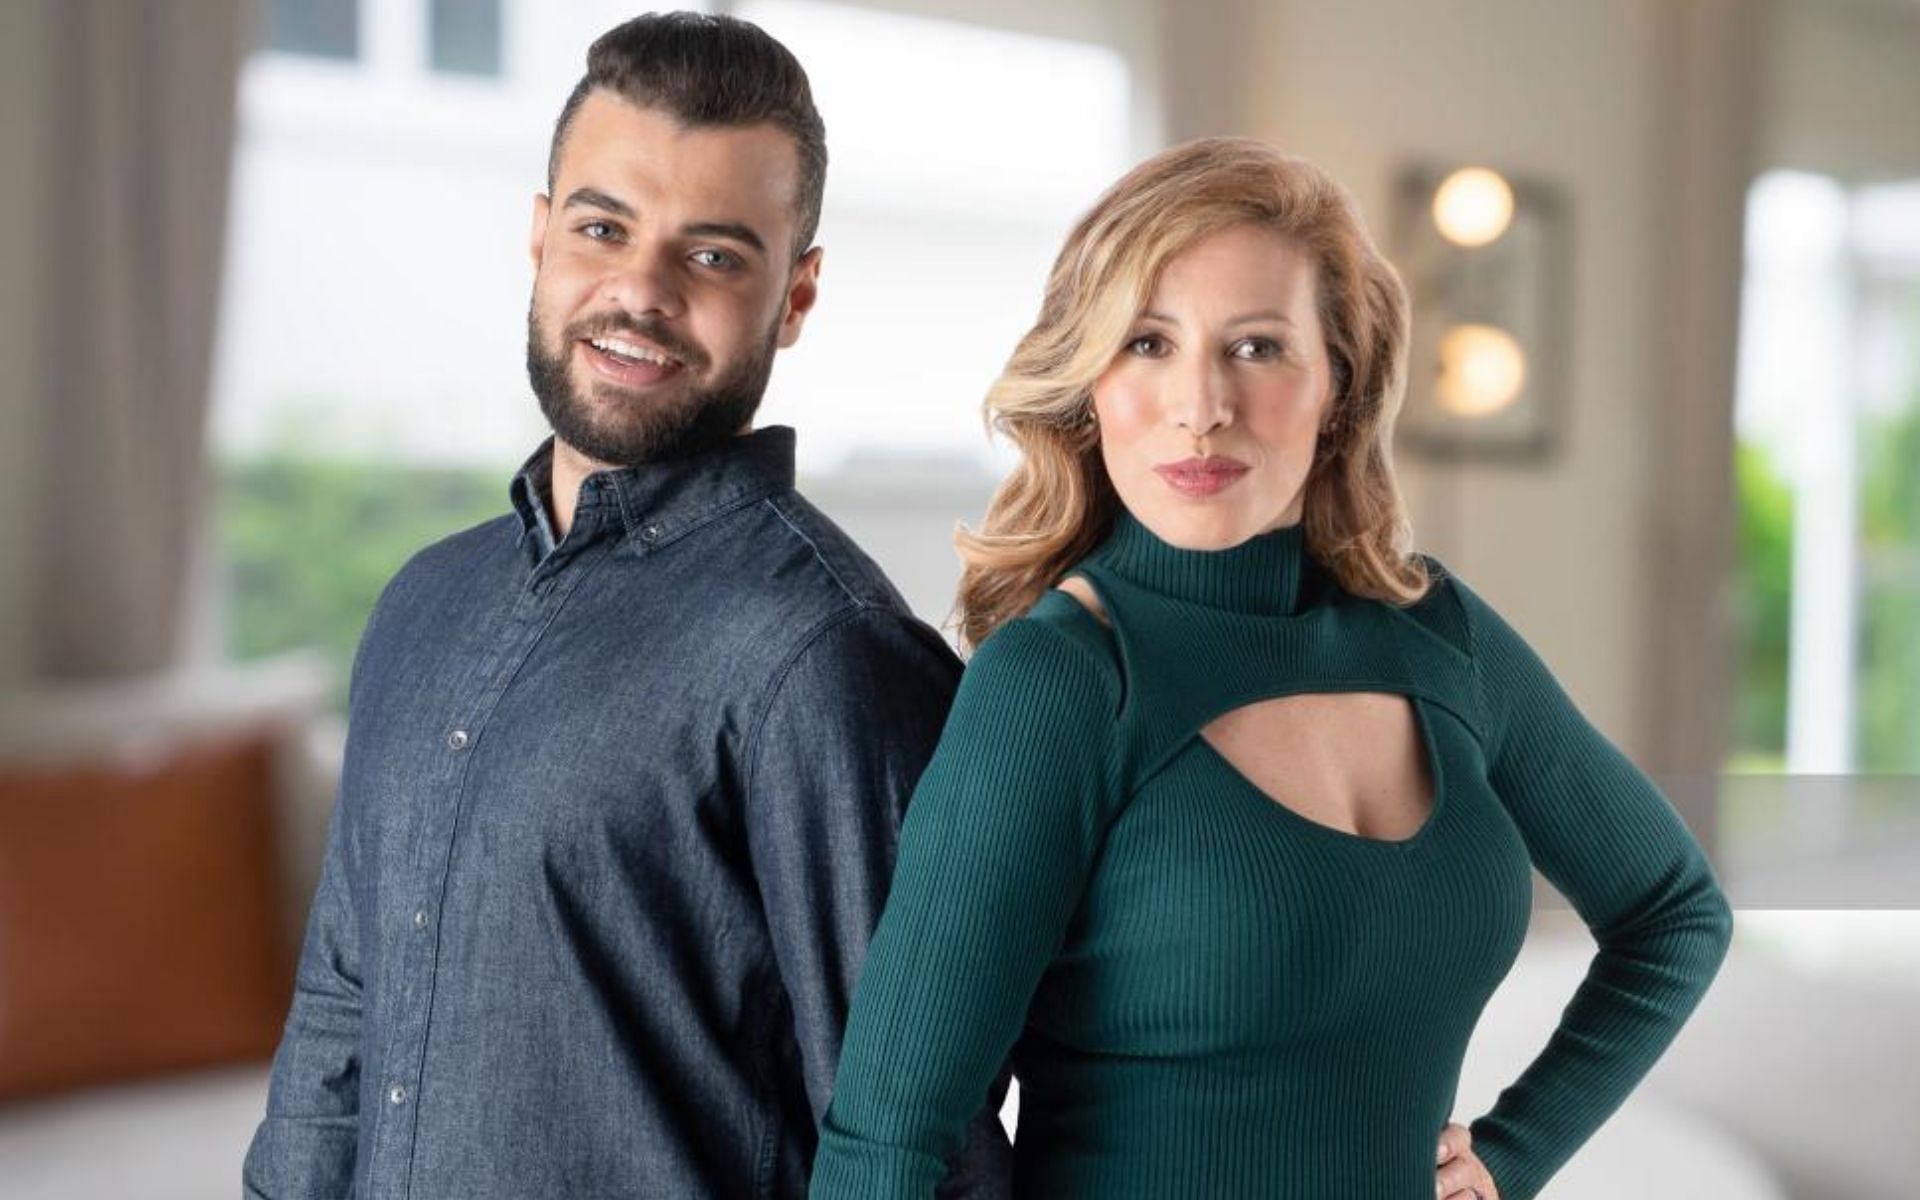 Fans feel Mohamed is marrying Yvette just to get a green card (Image via TLC)